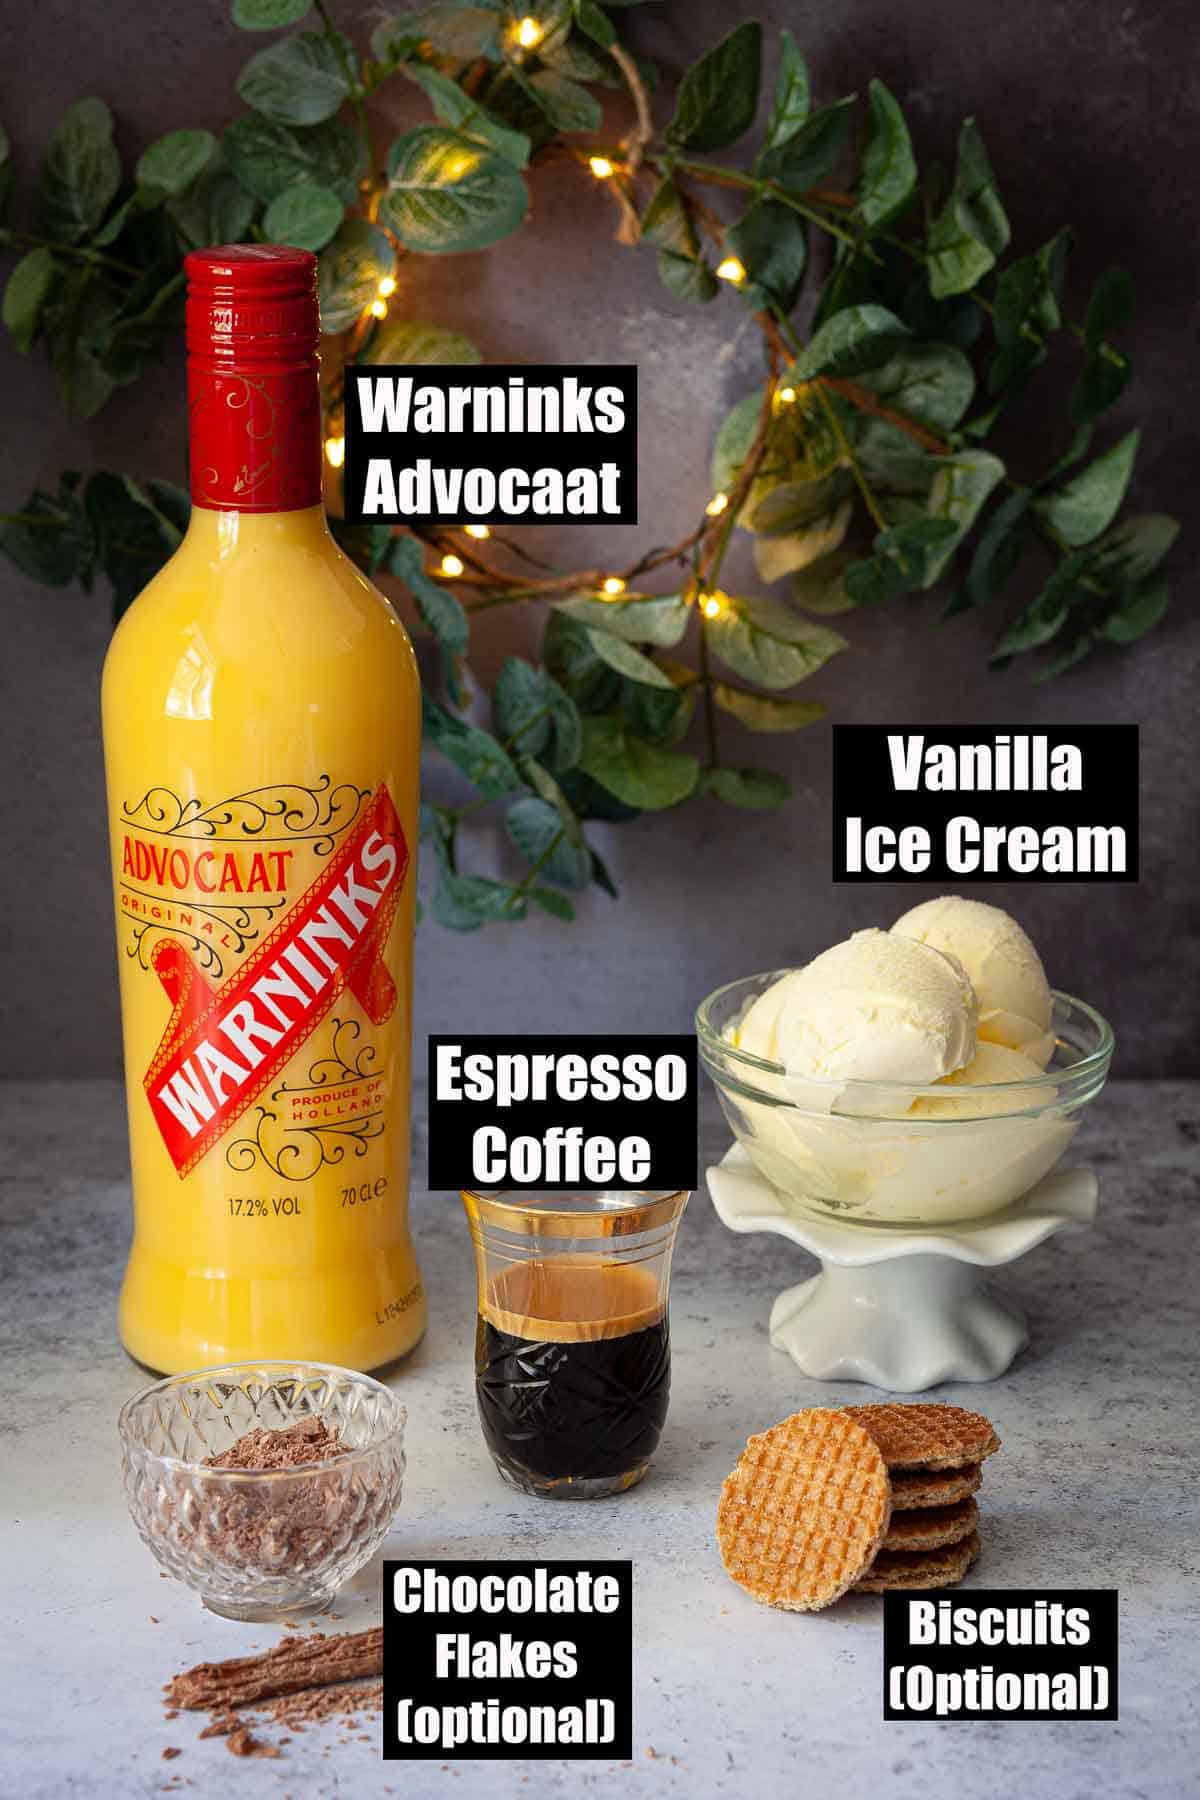 Labelled ingredients for affogato dessert with alcohol.